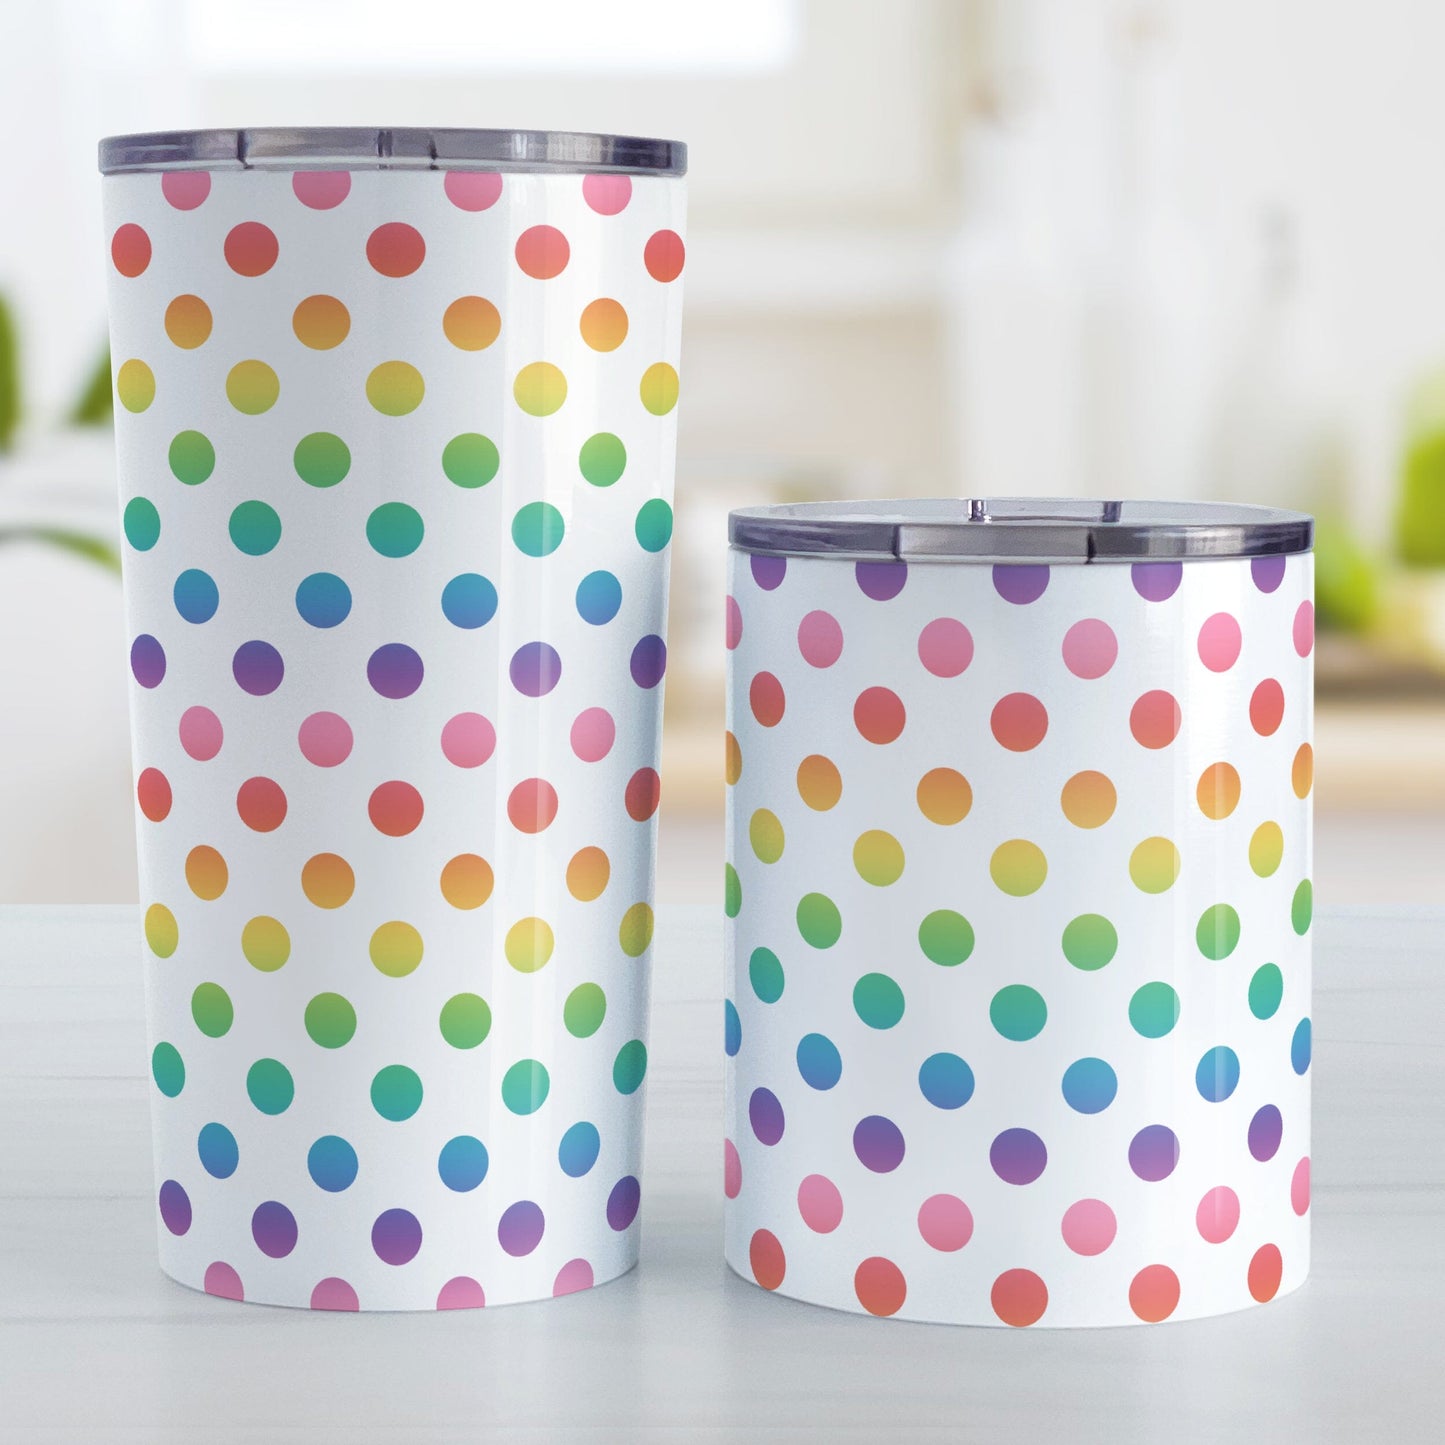 Rainbow Polka Dots Tumbler Cup (20oz or 10oz) at Amy's Coffee Mugs. Stainless steel tumbler cups designed with a colorful pattern of polka dots in a rainbow color progression that wraps around the cups. Photo shows both sized cups next to each other on a table.